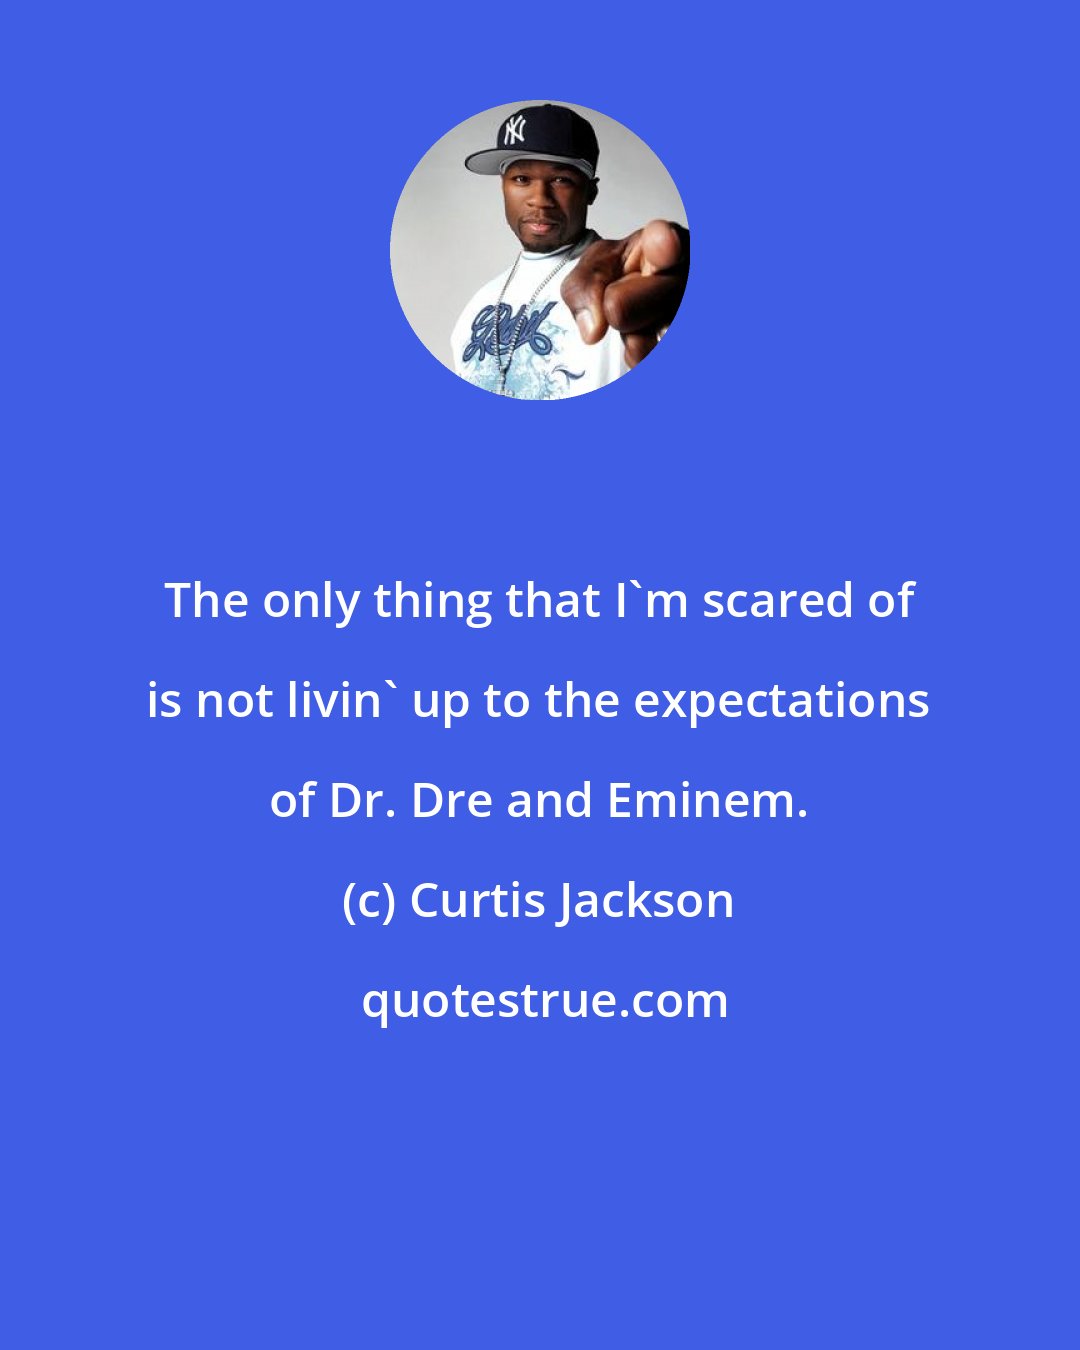 Curtis Jackson: The only thing that I'm scared of is not livin' up to the expectations of Dr. Dre and Eminem.